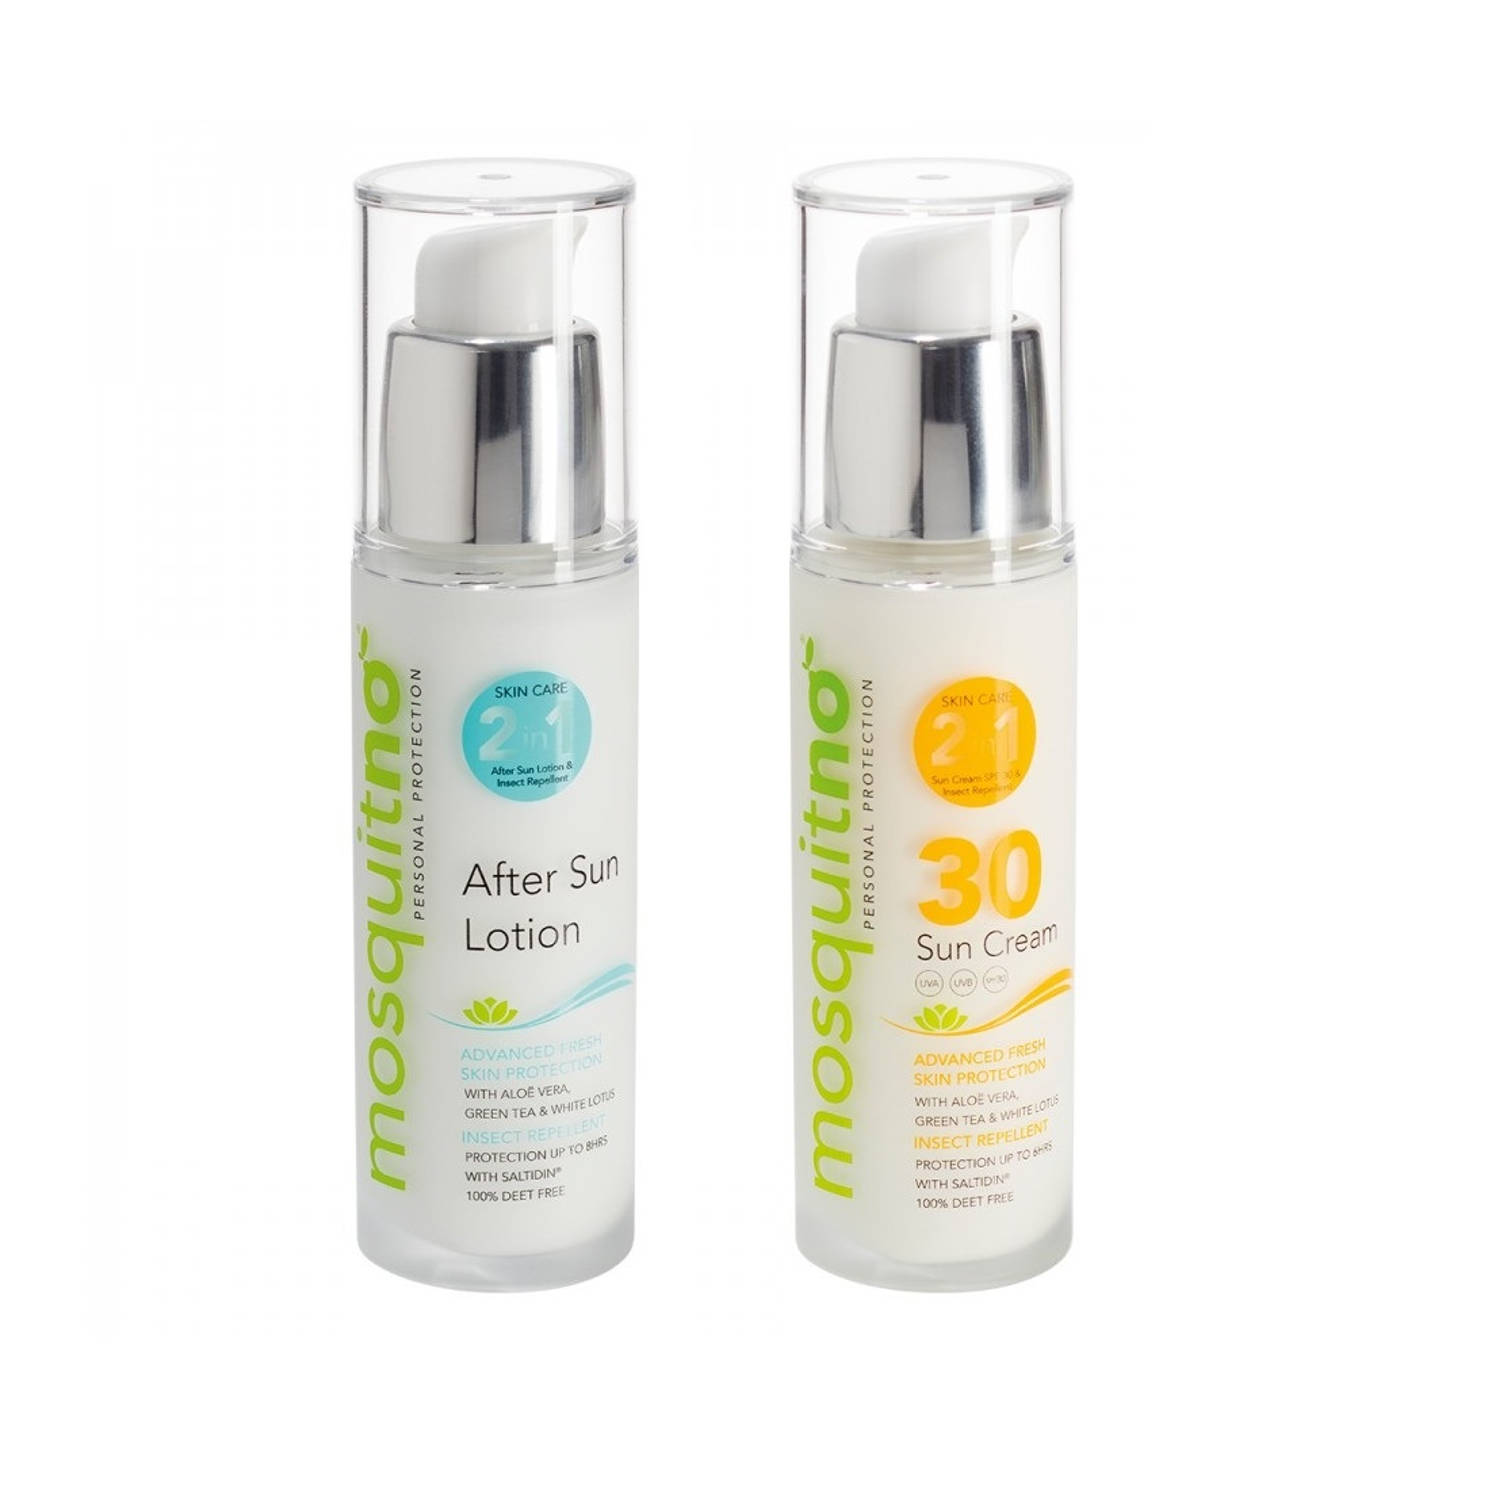 MosquitNo Zonnecreme & After Sun Set - Insectwerend - 2x50 ml